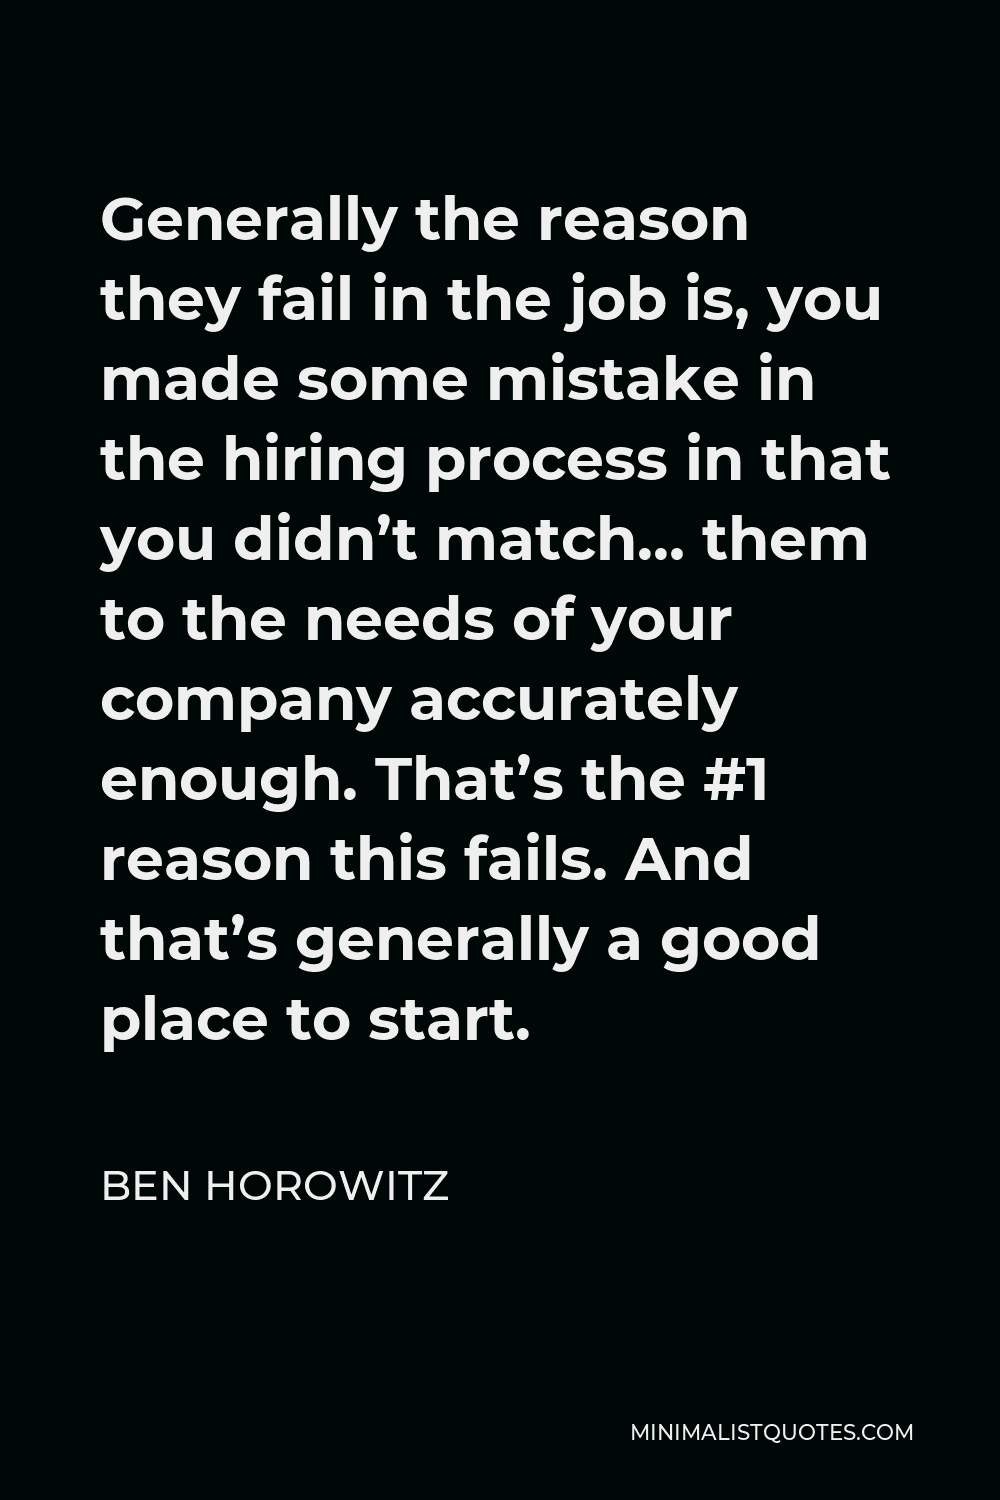 Ben Horowitz Quote - Generally the reason they fail in the job is, you made some mistake in the hiring process in that you didn’t match… them to the needs of your company accurately enough. That’s the #1 reason this fails. And that’s generally a good place to start.